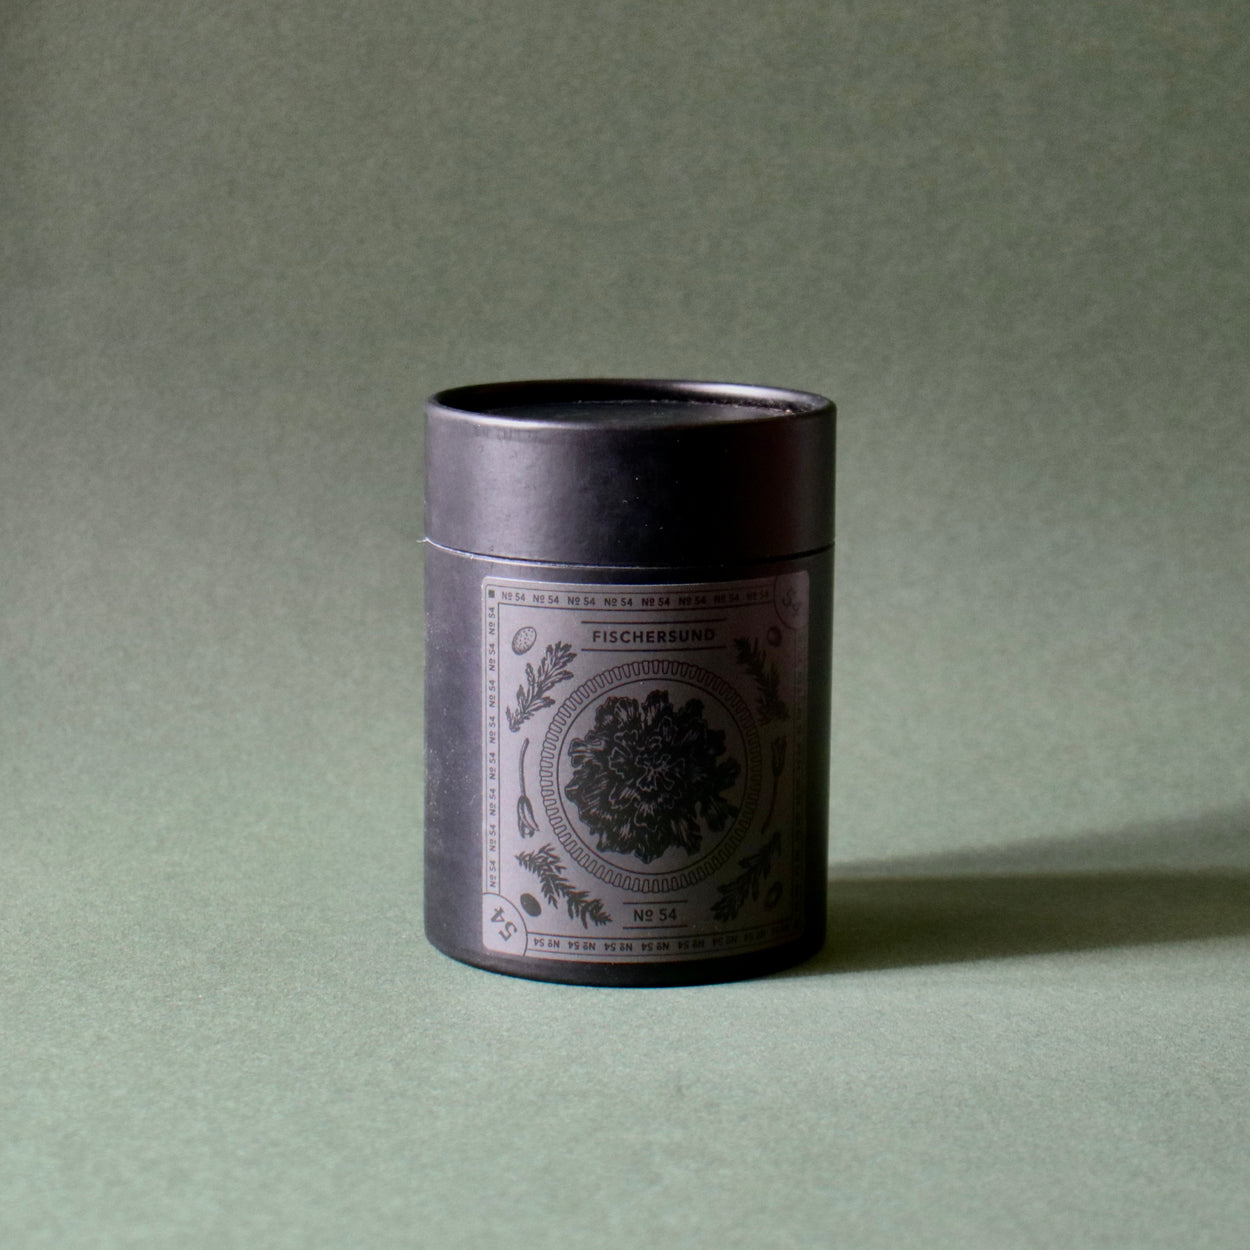 Fischersund No.54 candle with tube packaging against a green backdrop.